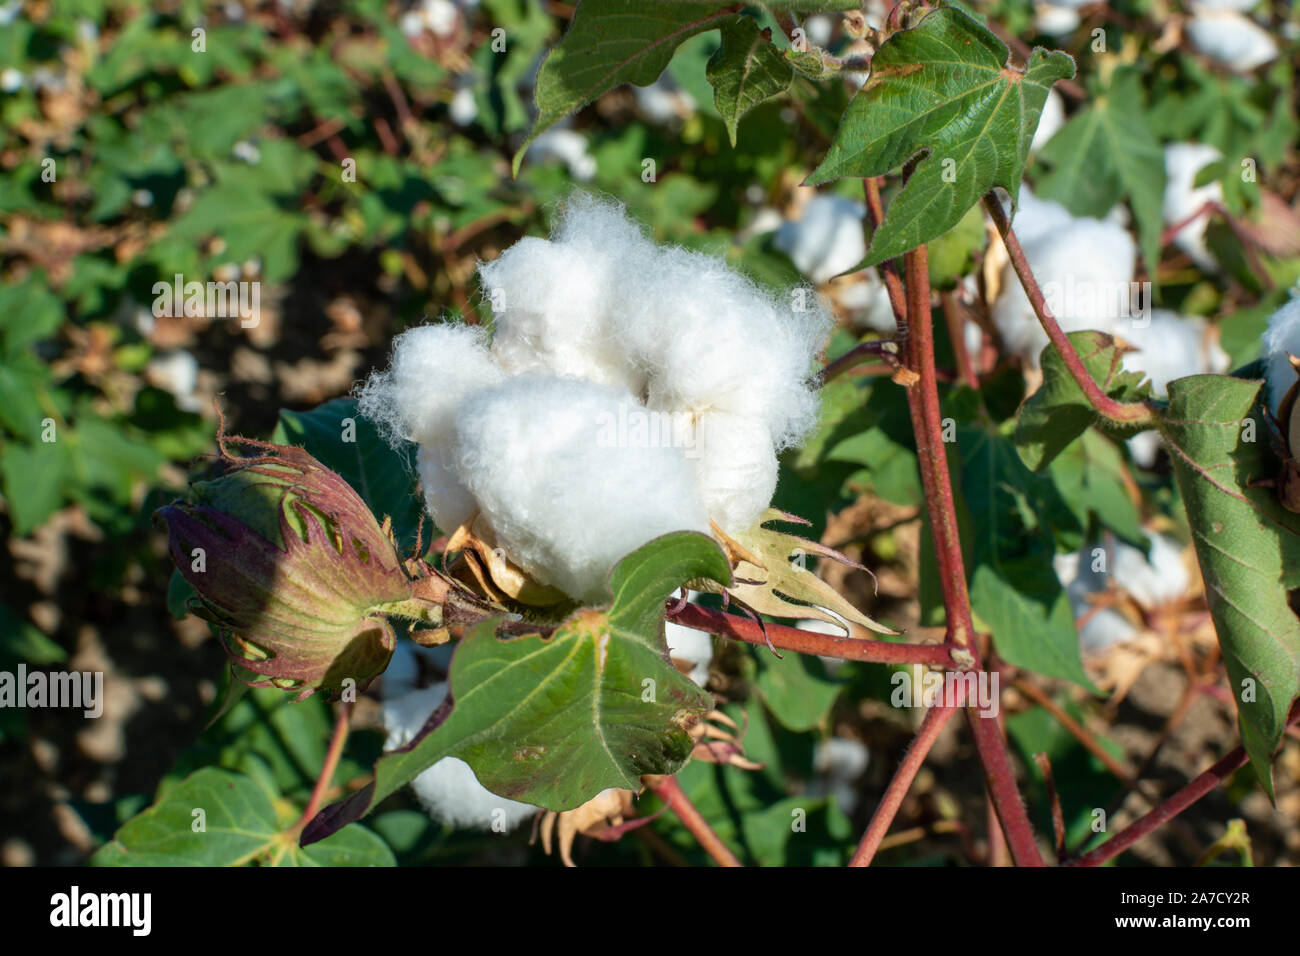 Plantations of organic fiber cotton plans with white buds ready for harvest, Andalusia, Spain Stock Photo